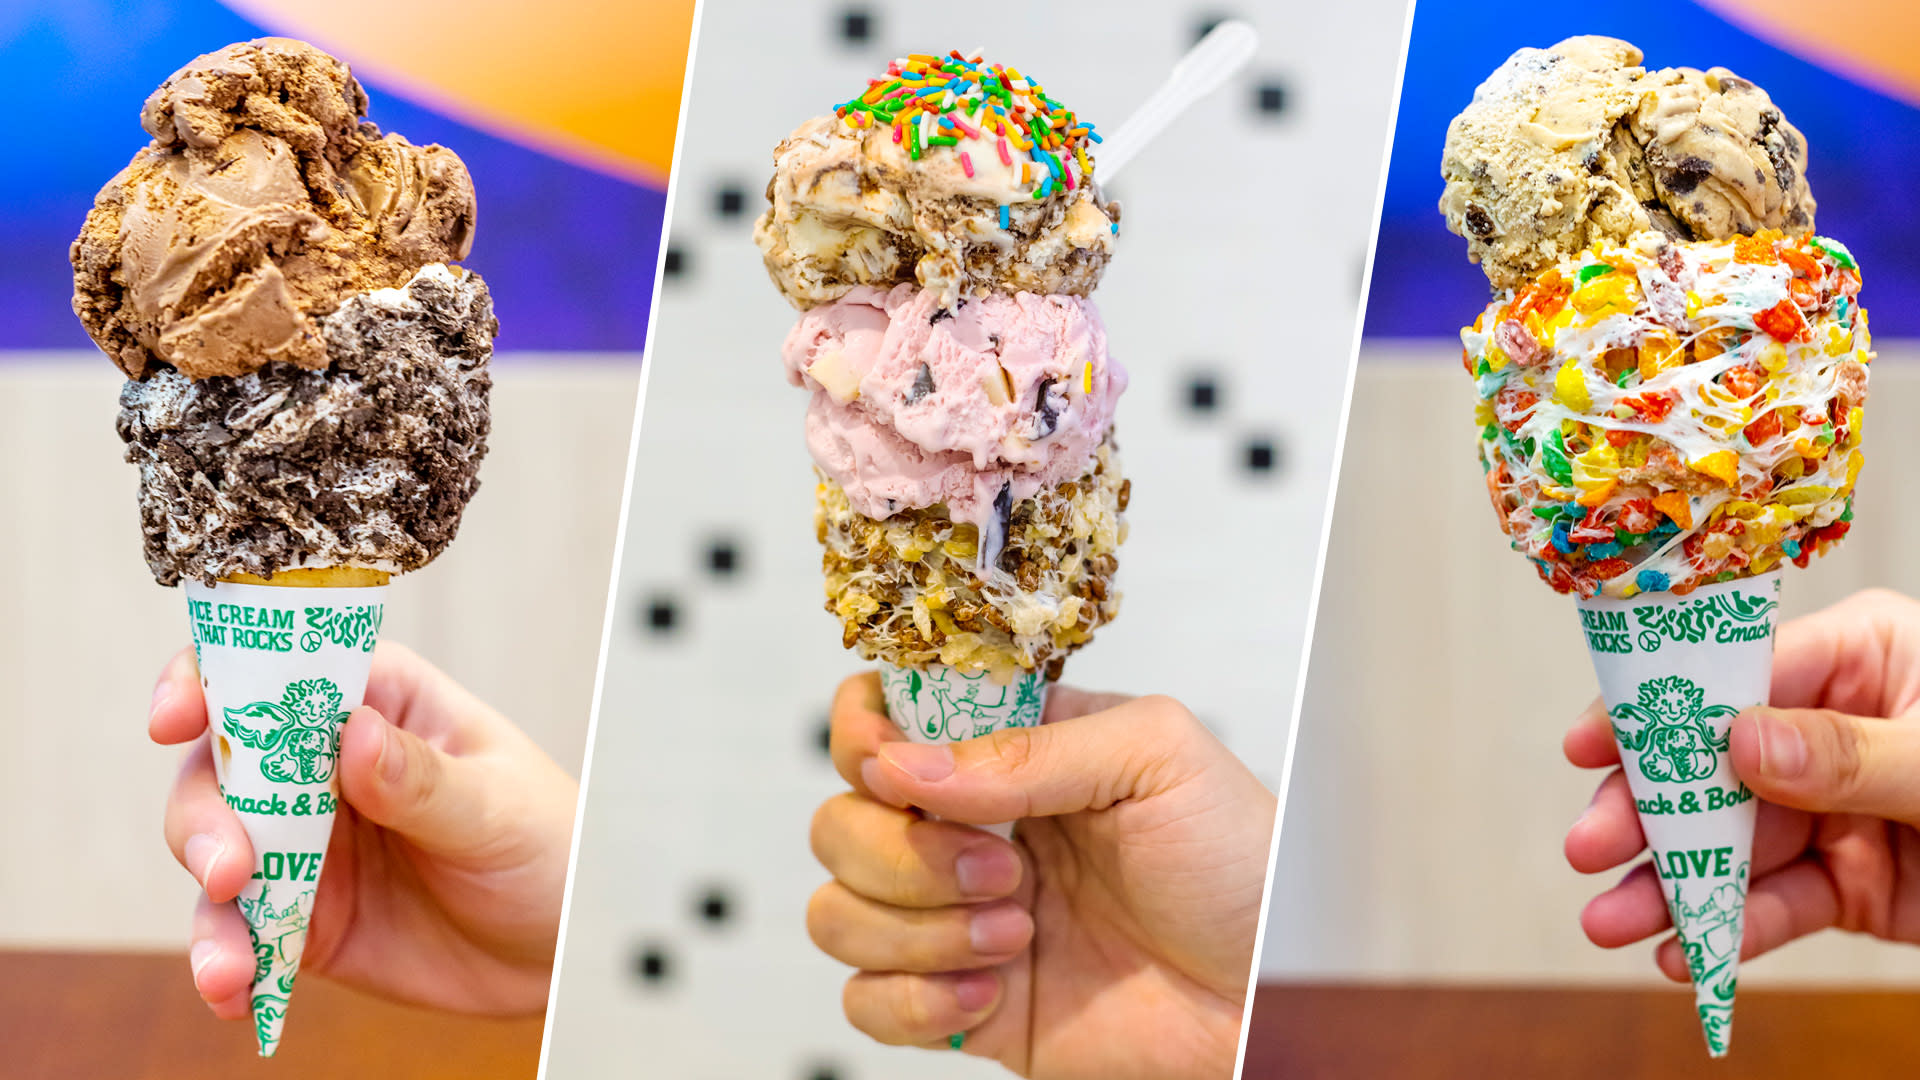 Would You Splash Out $46.50 For 10 Scoops Of Ice Cream On A Marshmallow Cone?